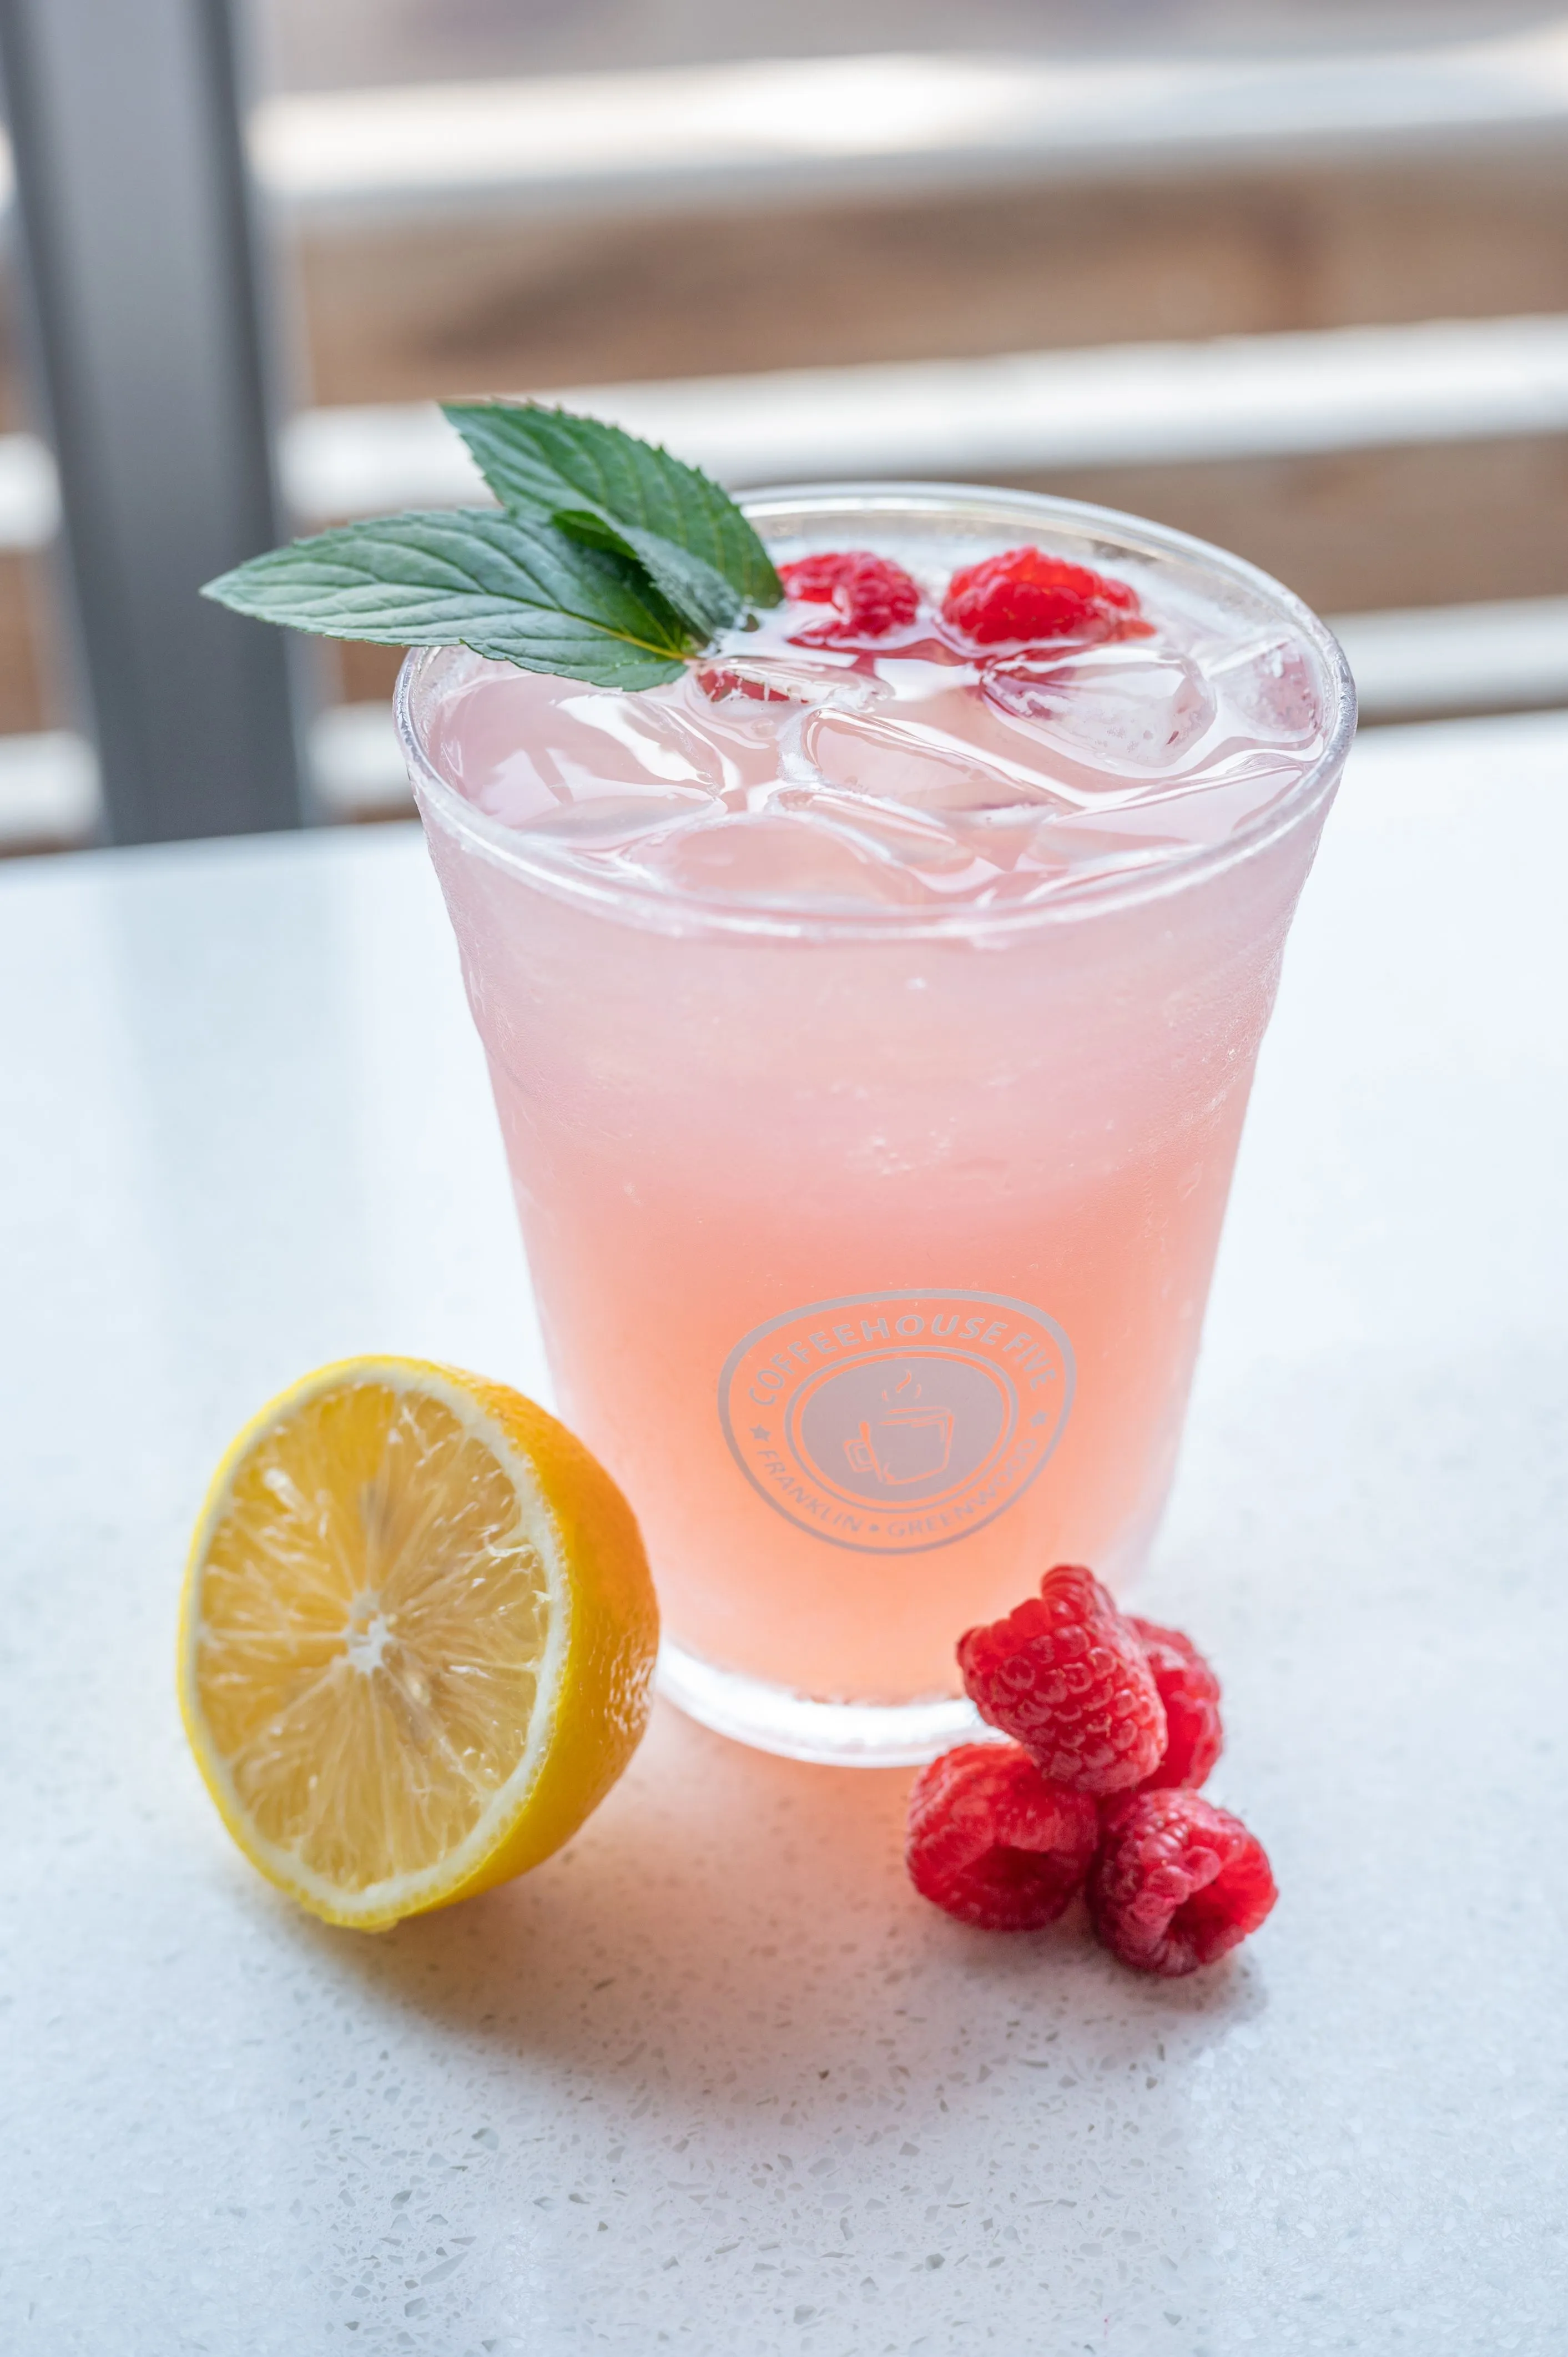 Refreshing pink lemonade in a glass with ice and raspberries, garnished with a mint leaf, accompanied by half a lemon and whole raspberries on a marble surface.